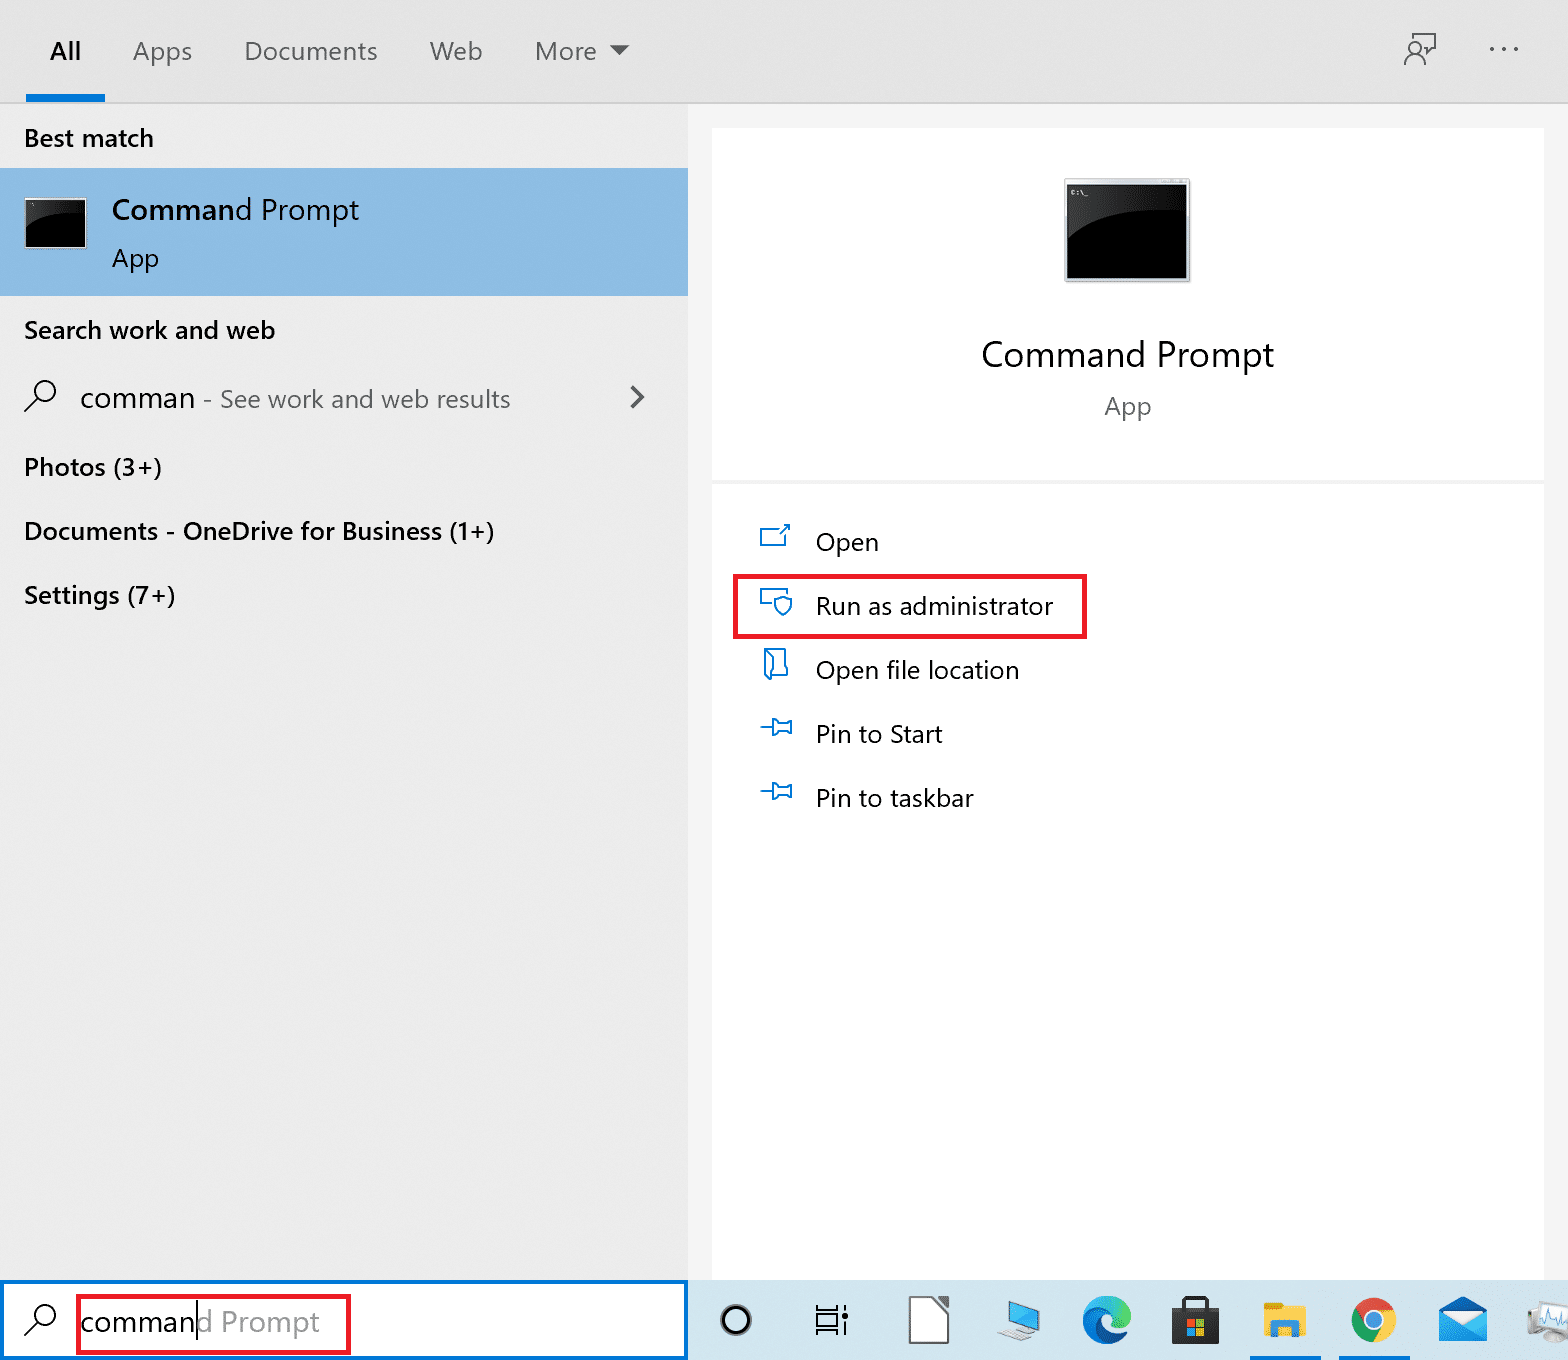 Type command in the Windows search bar and launch the app from the search result